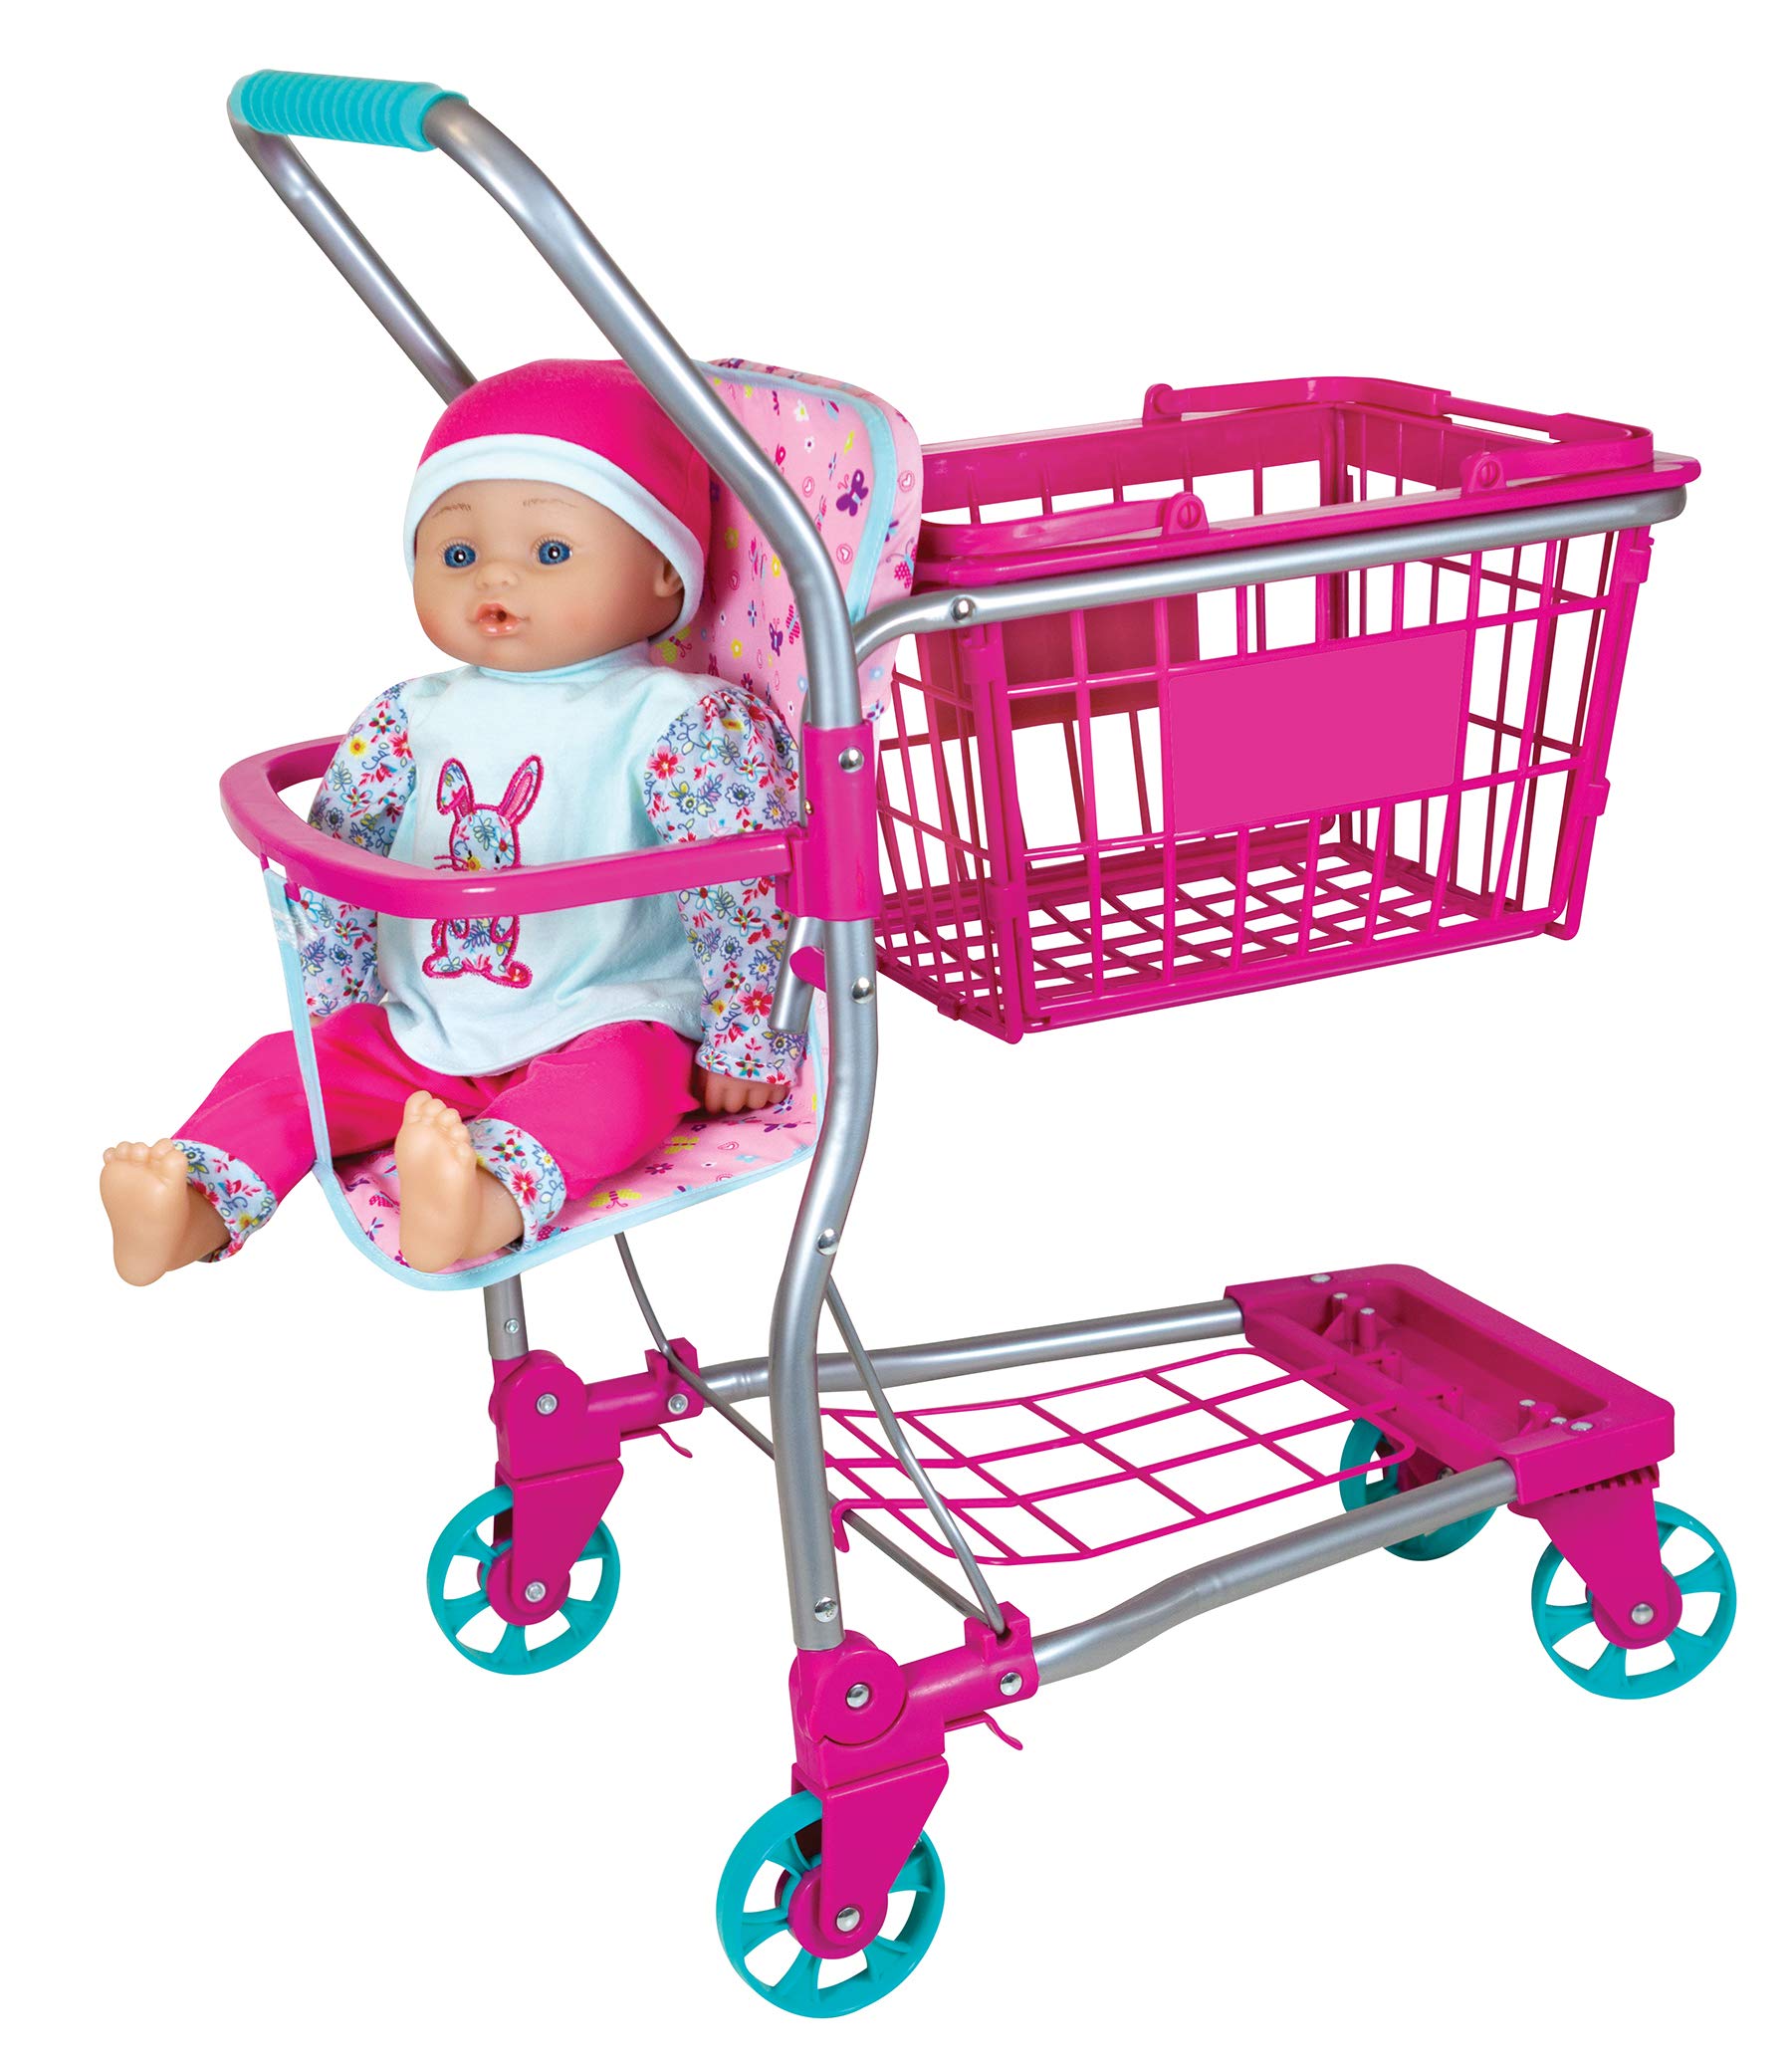 Lissi Shopping Cart with 16" Baby Doll